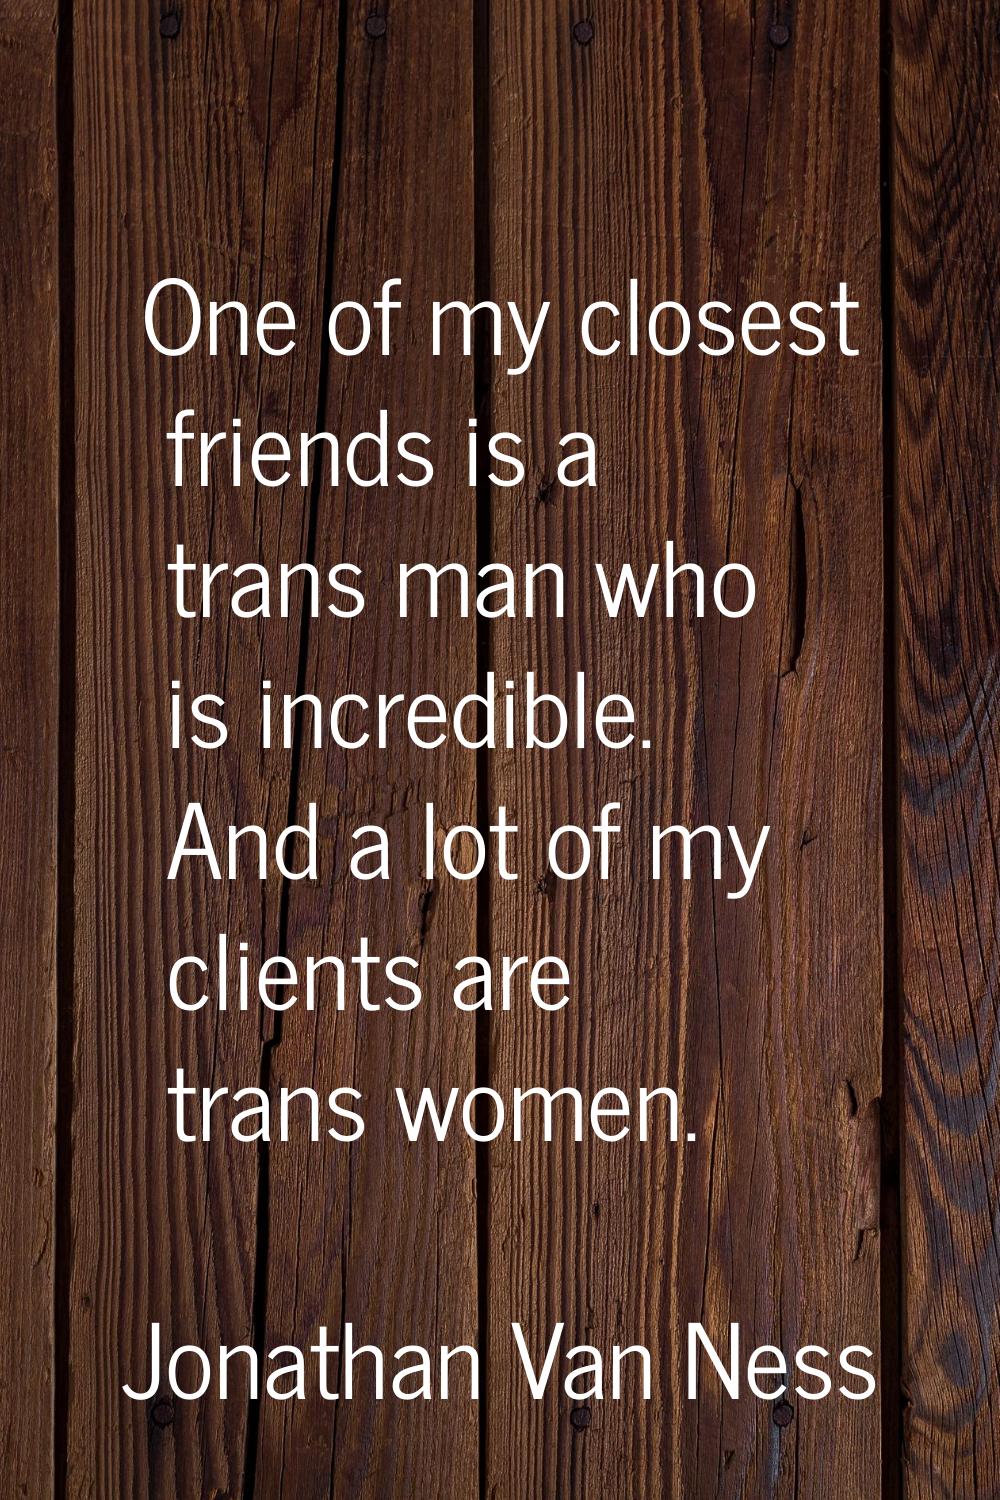 One of my closest friends is a trans man who is incredible. And a lot of my clients are trans women